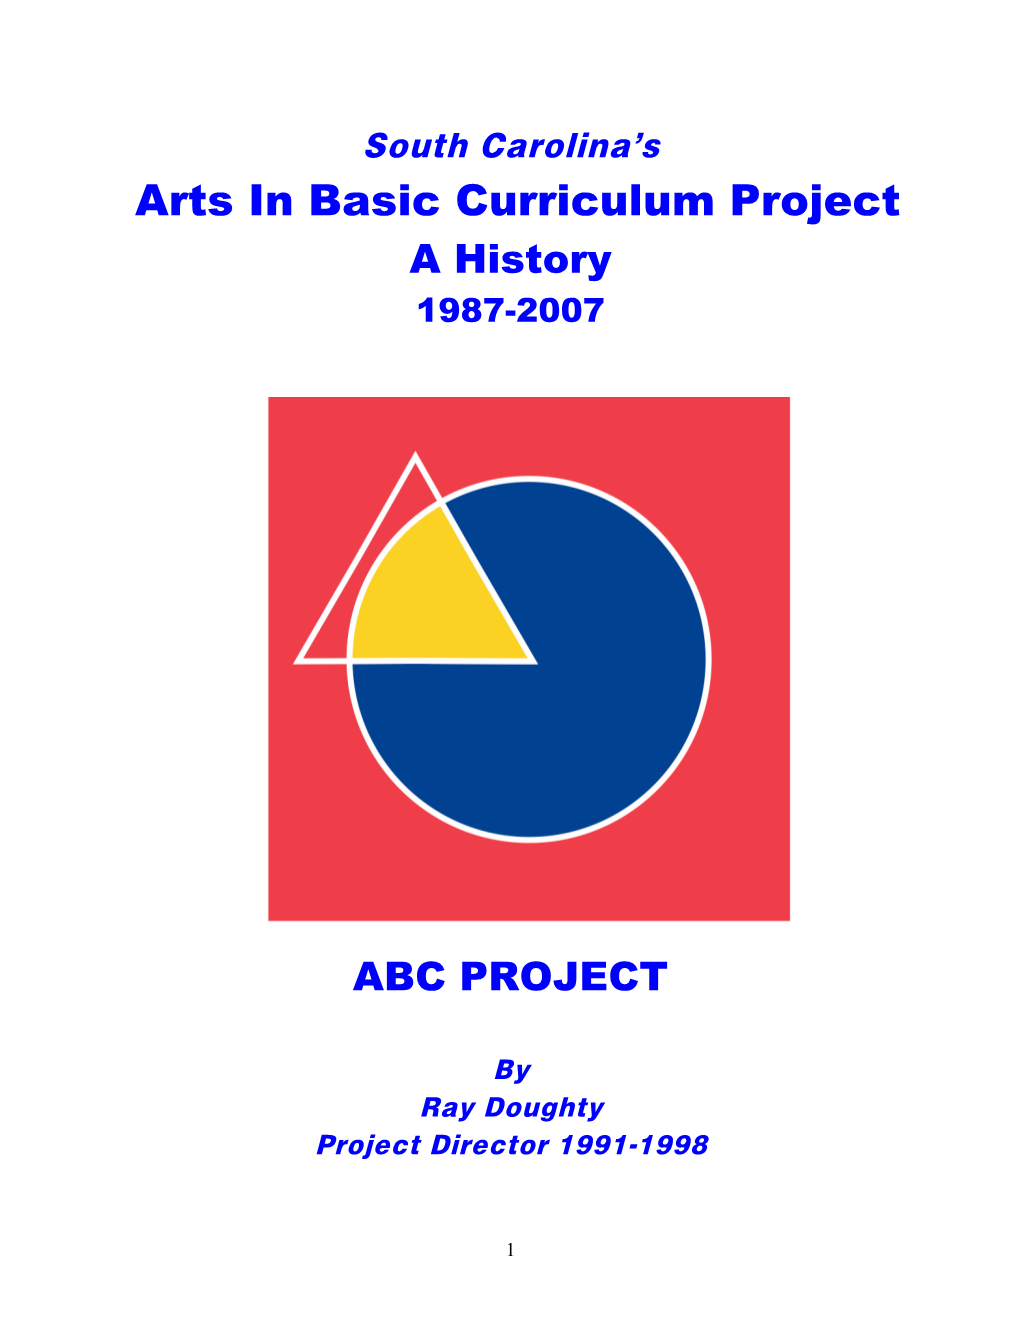 Arts in Basic Curriculum Project a History 1987-2007